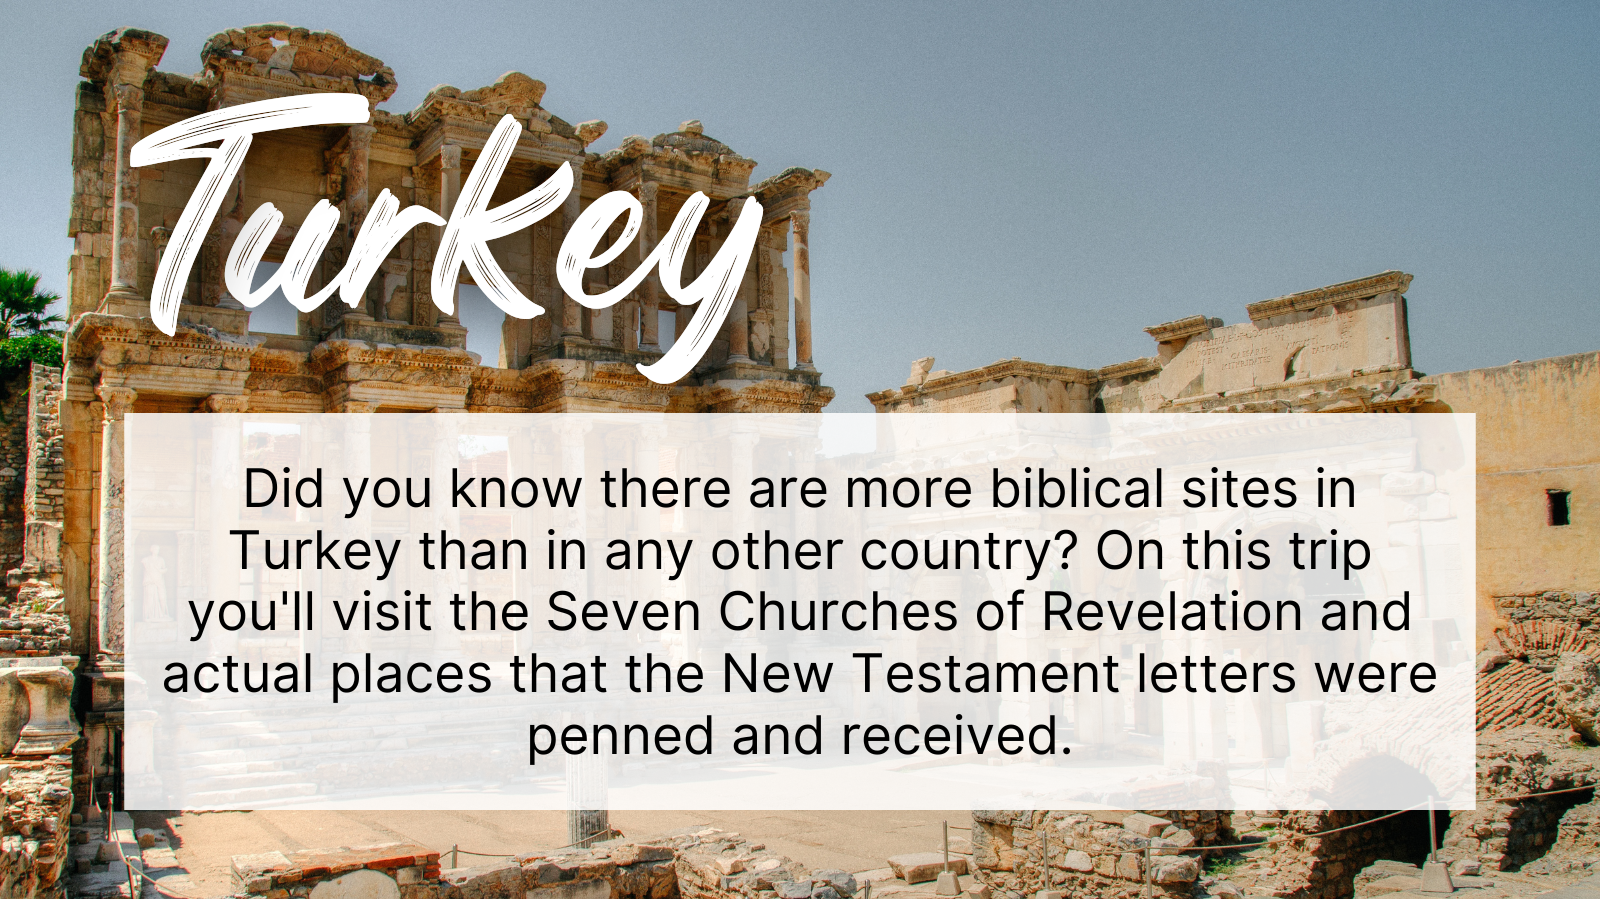 Did you know there are more biblical sites in Turkey than in any other country? On this trip you'll visit the Seven Churches of Revelation and actual places that the New Testament letters were penned and received.